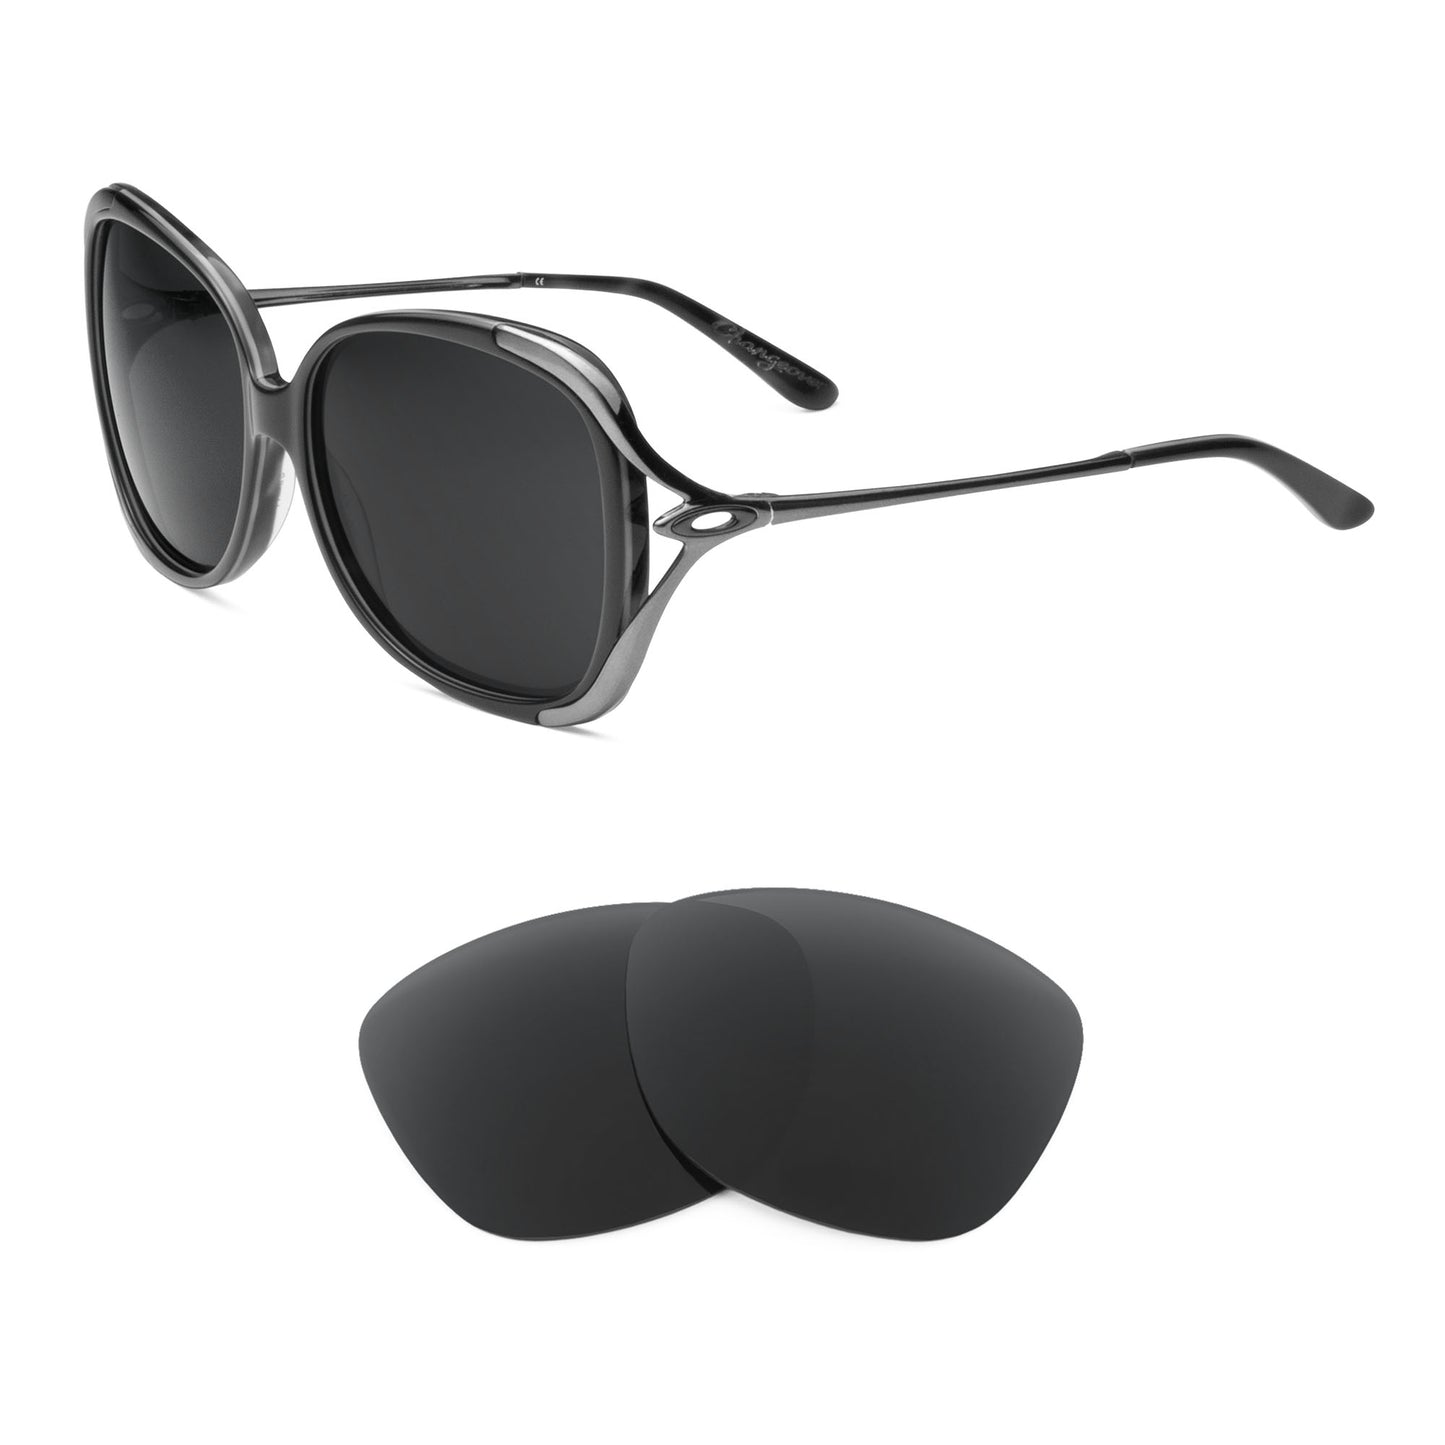 Oakley Changeover sunglasses with replacement lenses